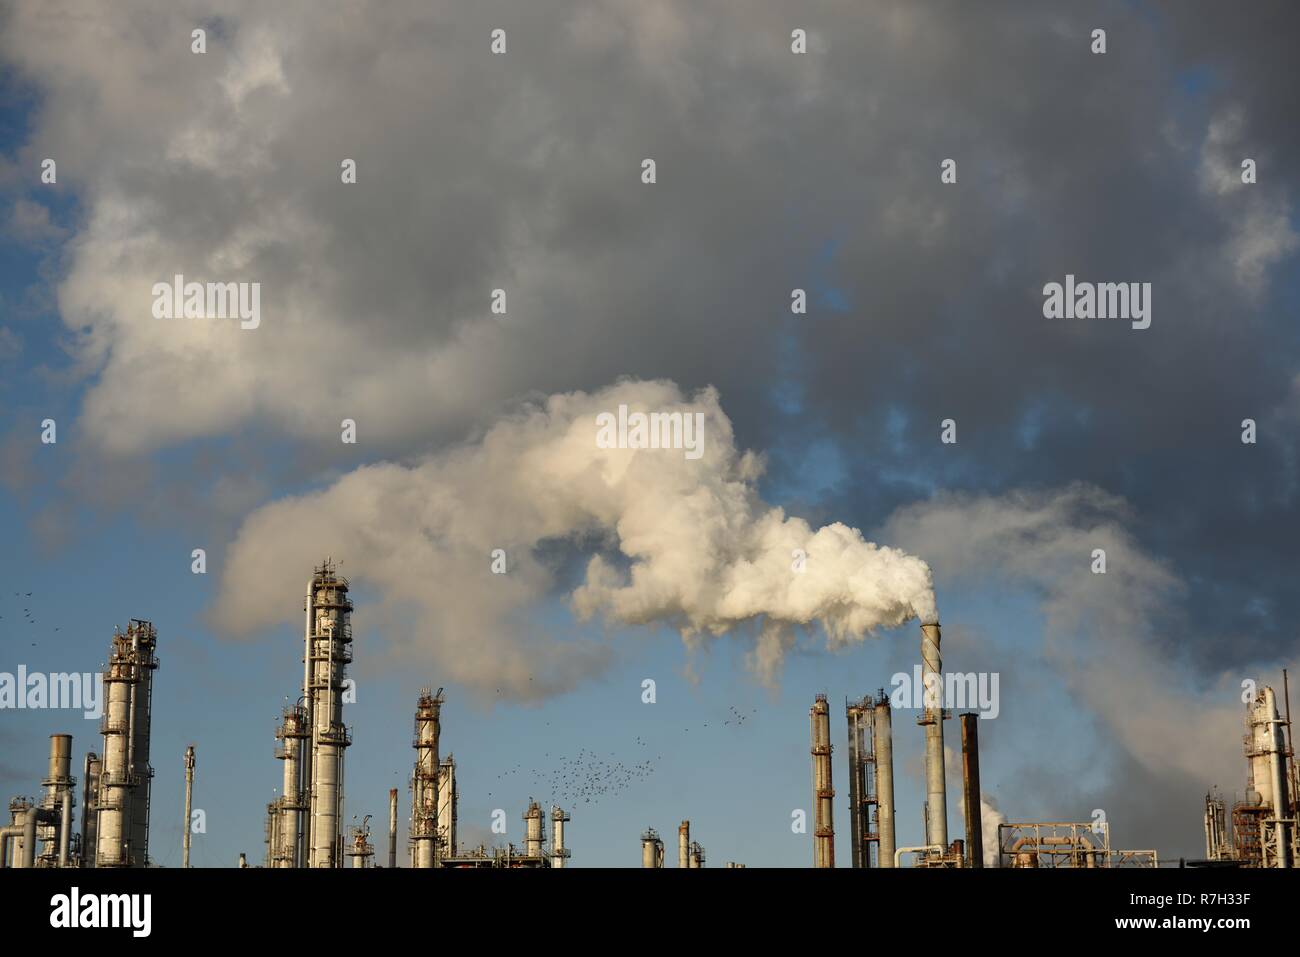 Smoke rising from a complex arrangement of metal towers and pipes at an industrial oil and gas refinery in Corpus Christi, Texas, USA Stock Photo